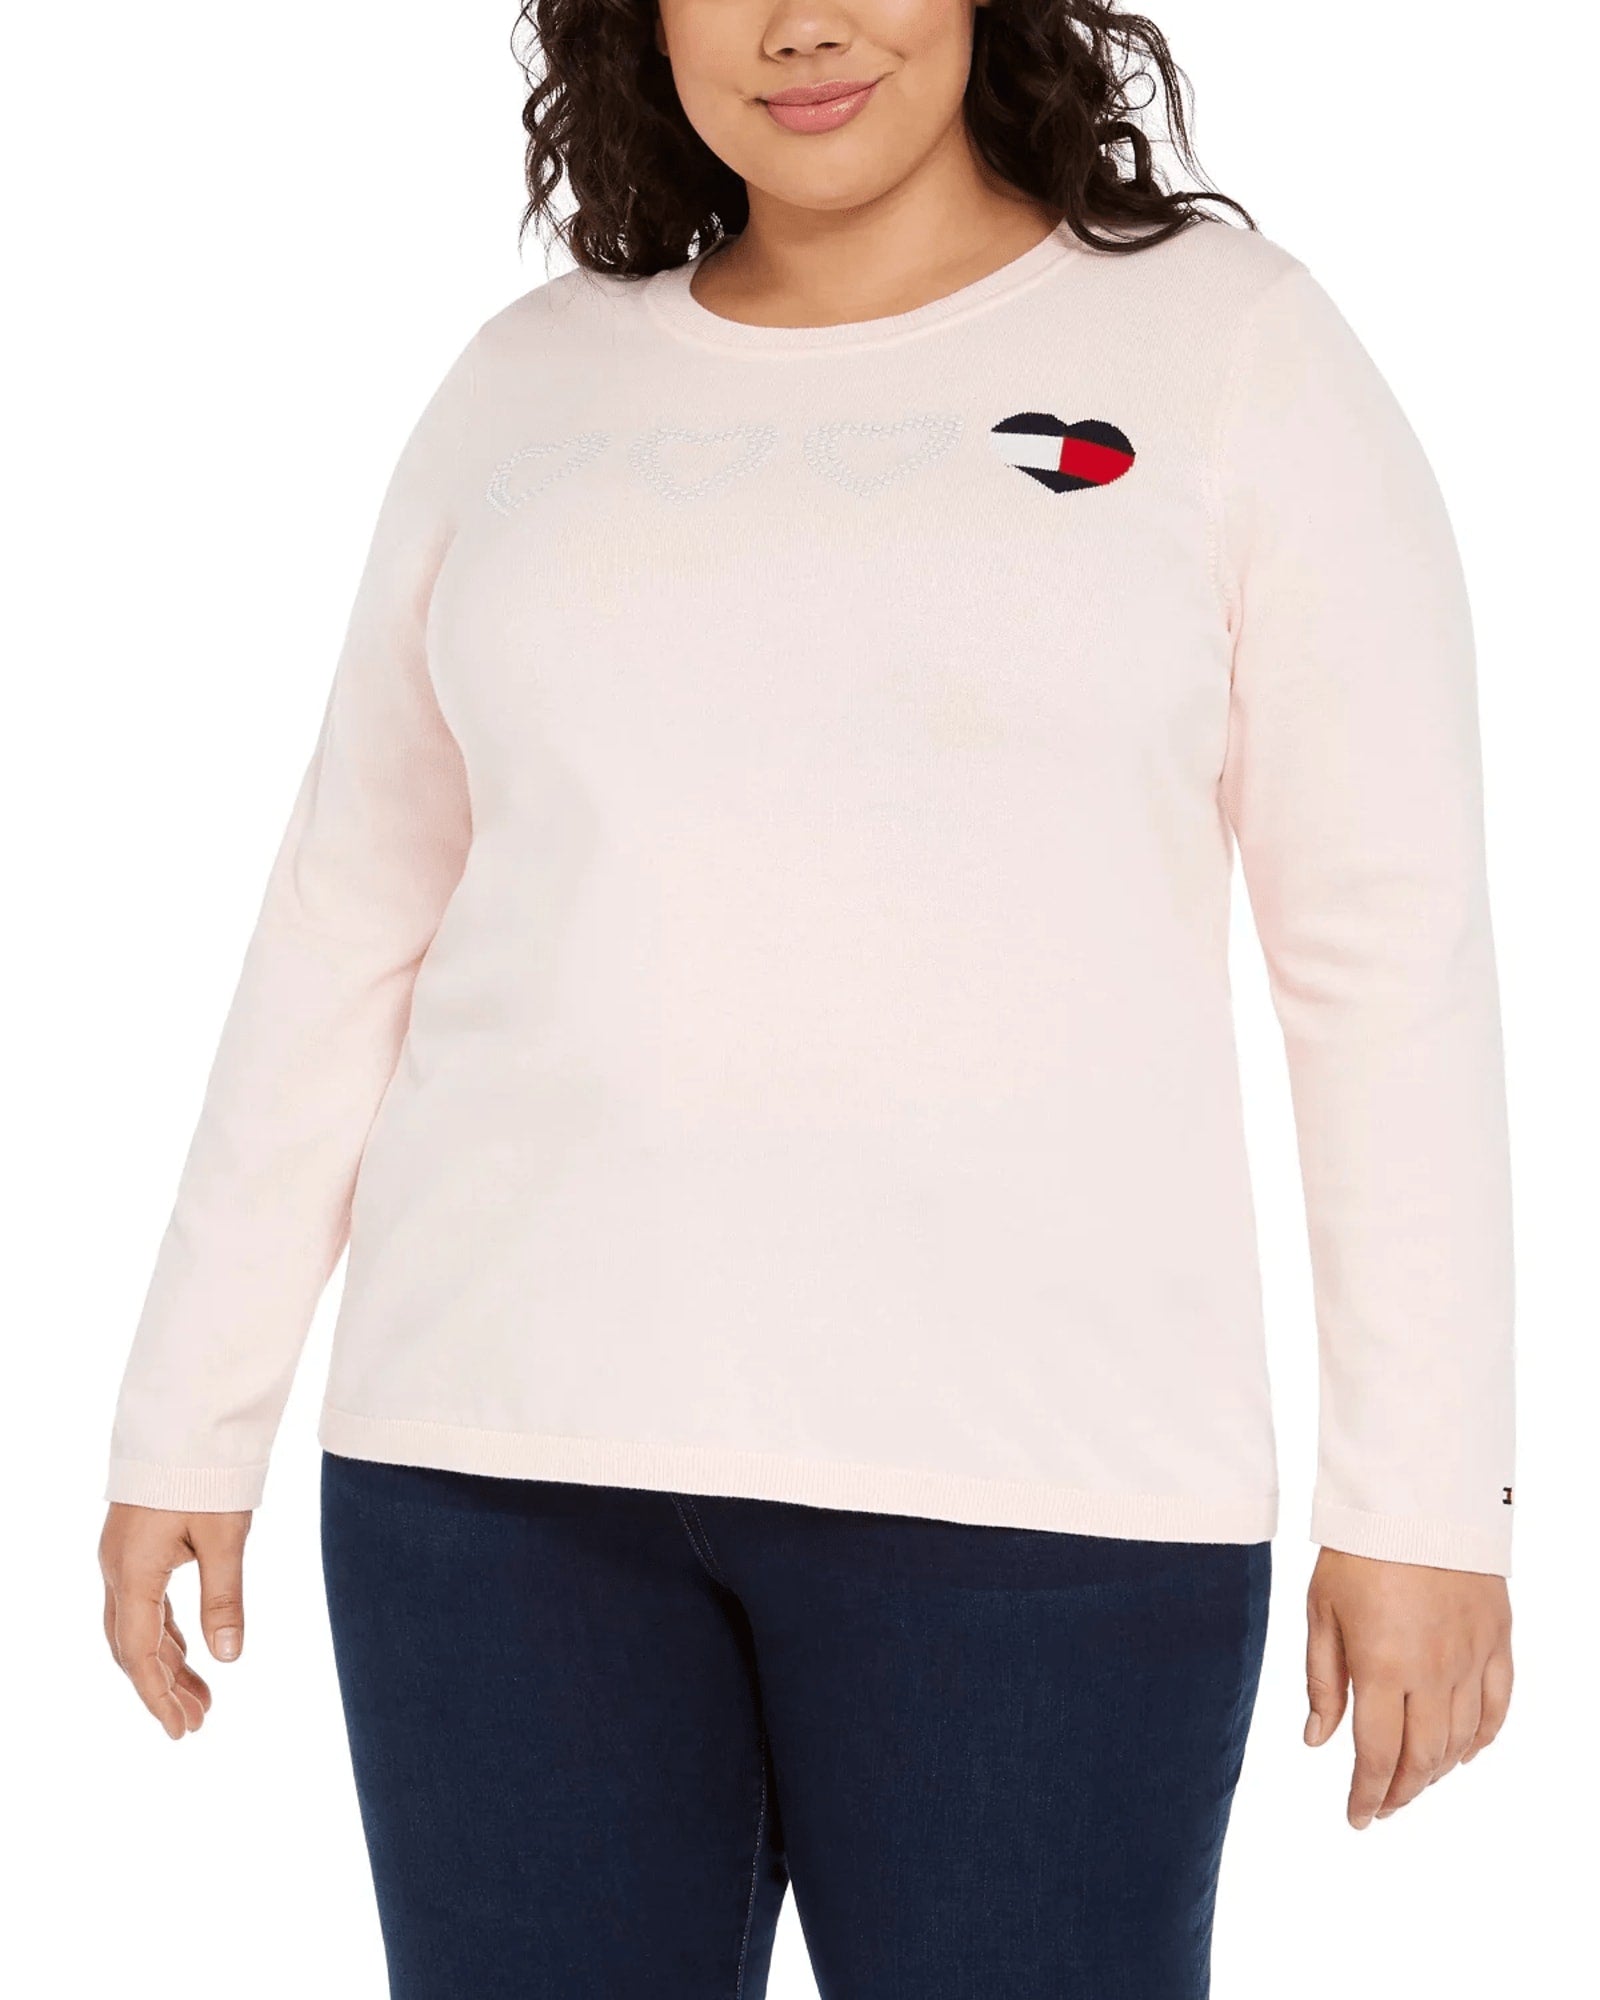 Plus Size Embroidered Sweaters